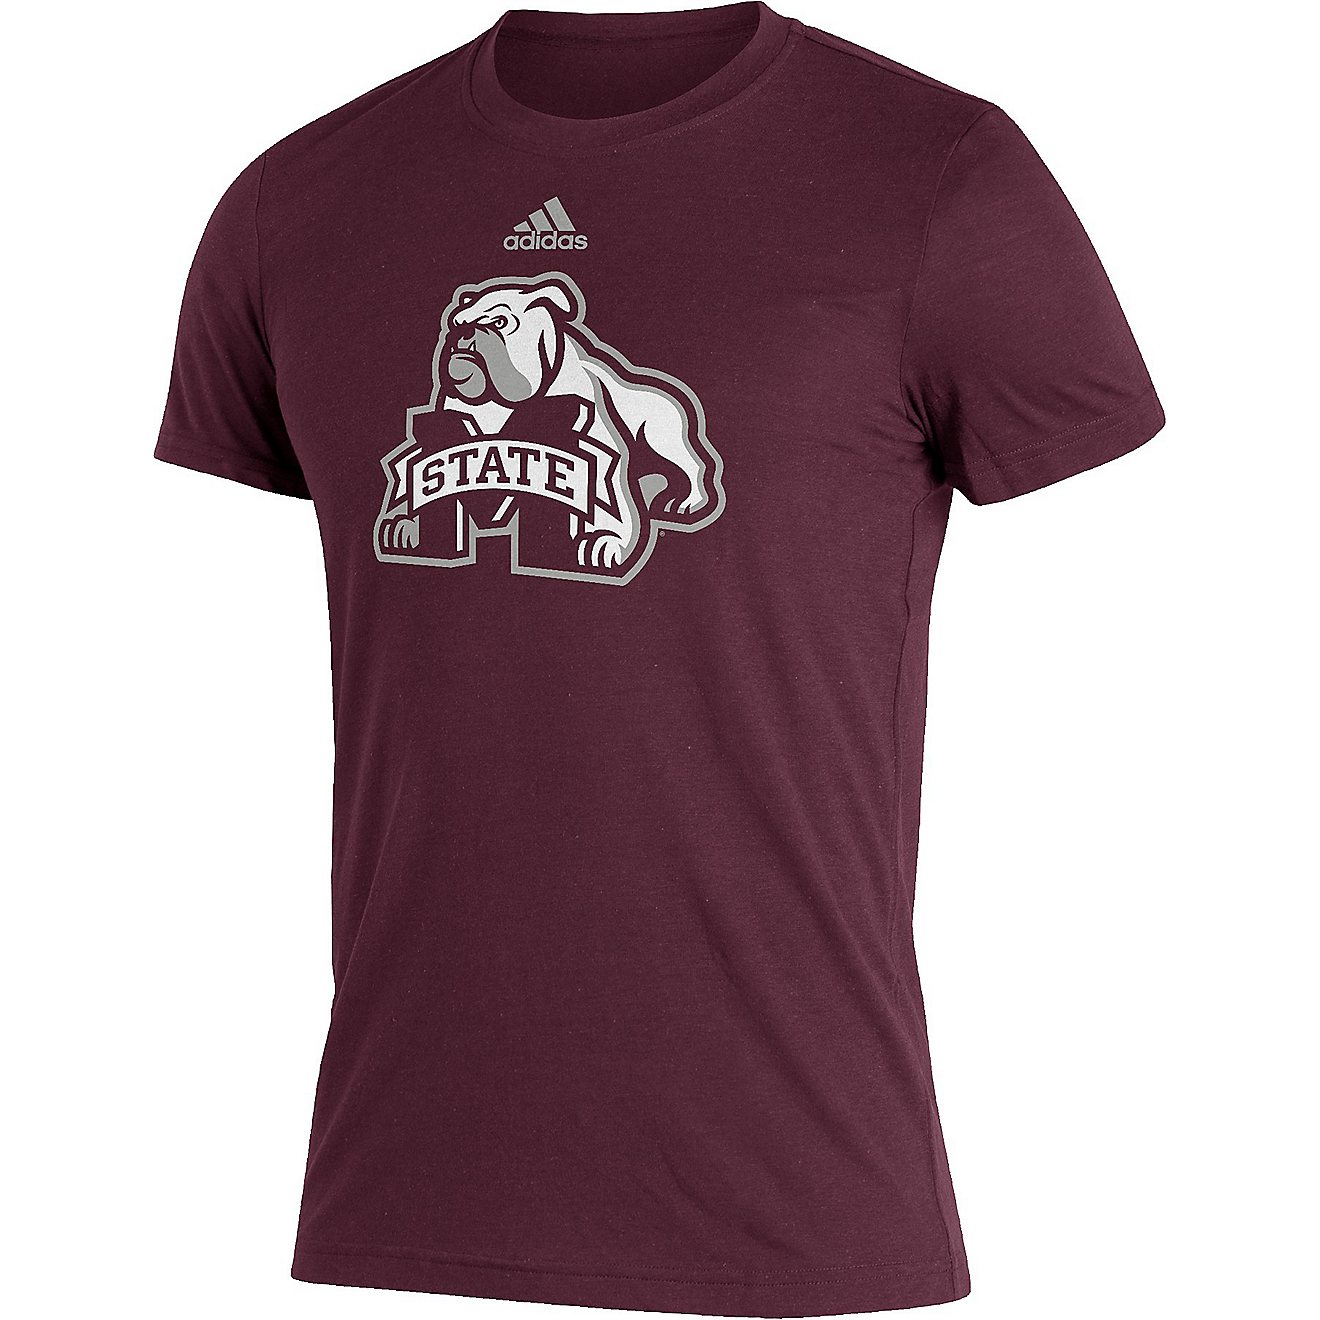 adidas Men’s Mississippi State University Blend T-shirt                                                                        - view number 1